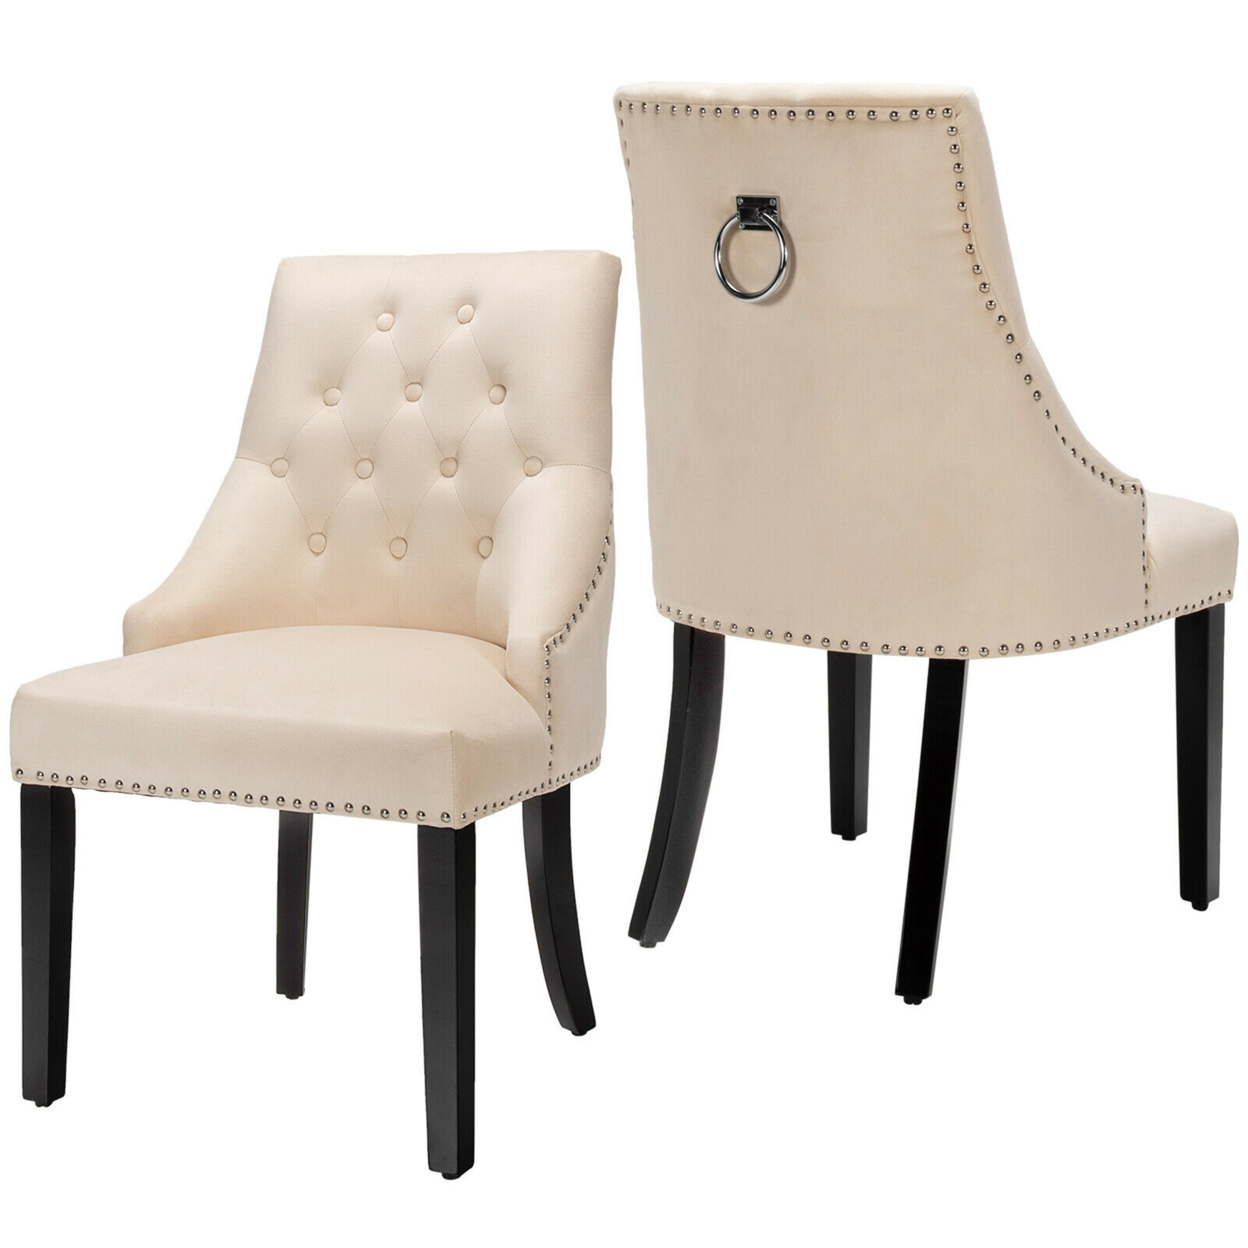 Set Of 2 Button-Tufted Dining Chair Upholstered Armless Side Chair - Beige